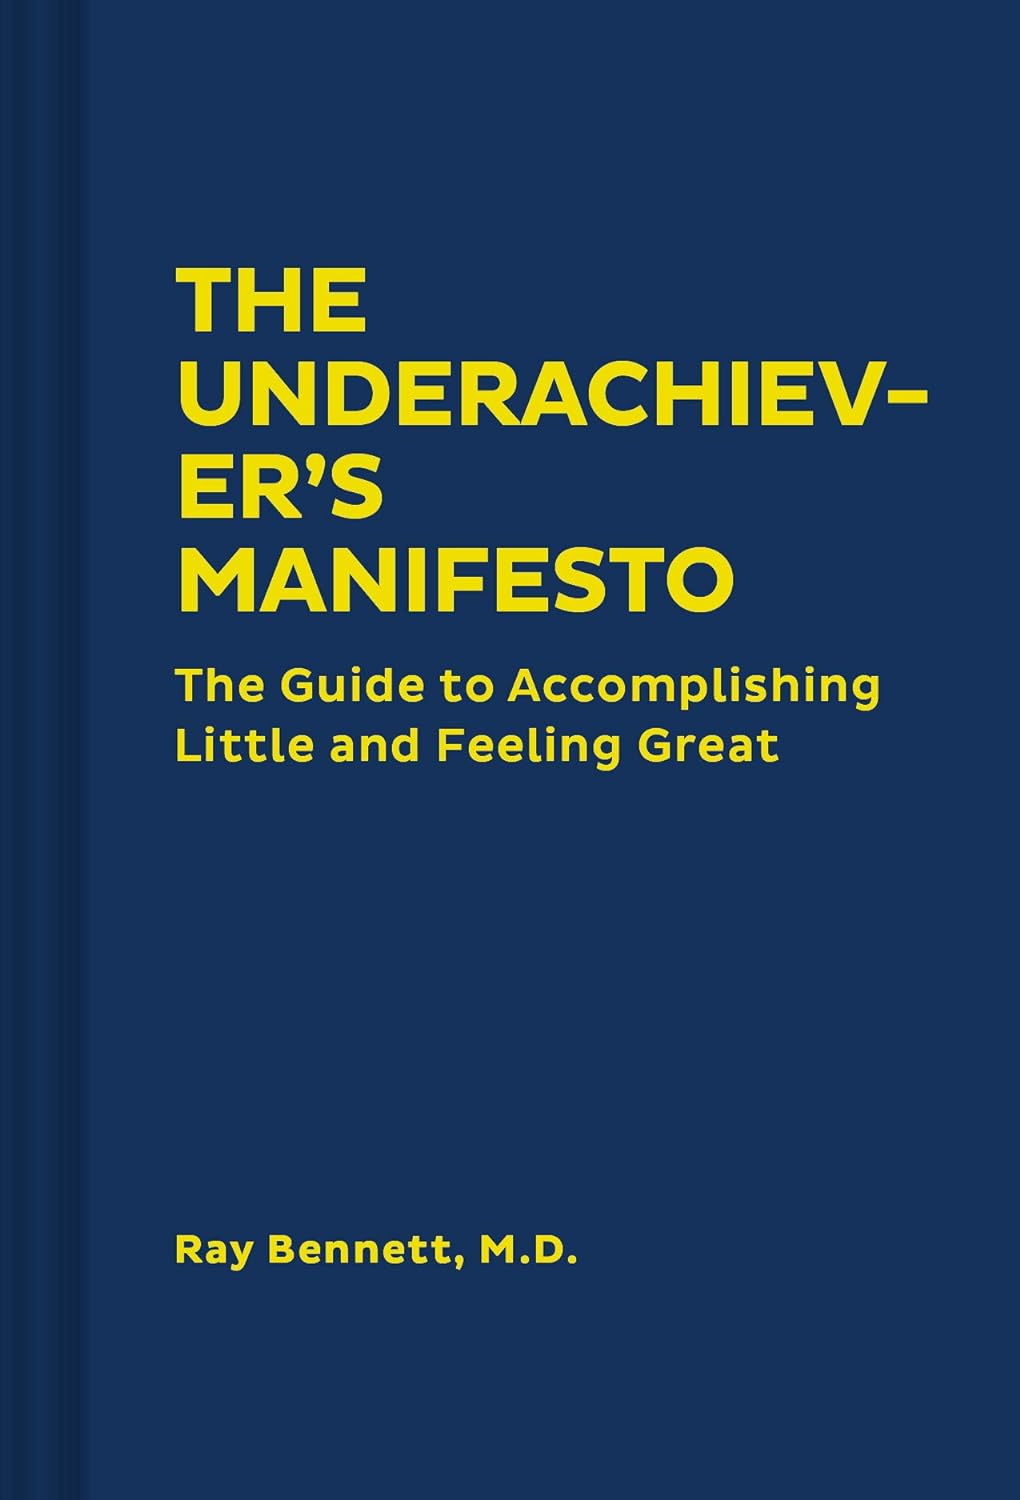 The Underachiever's Manifesto: The Guide to Accomplishing Little and Feeling Great